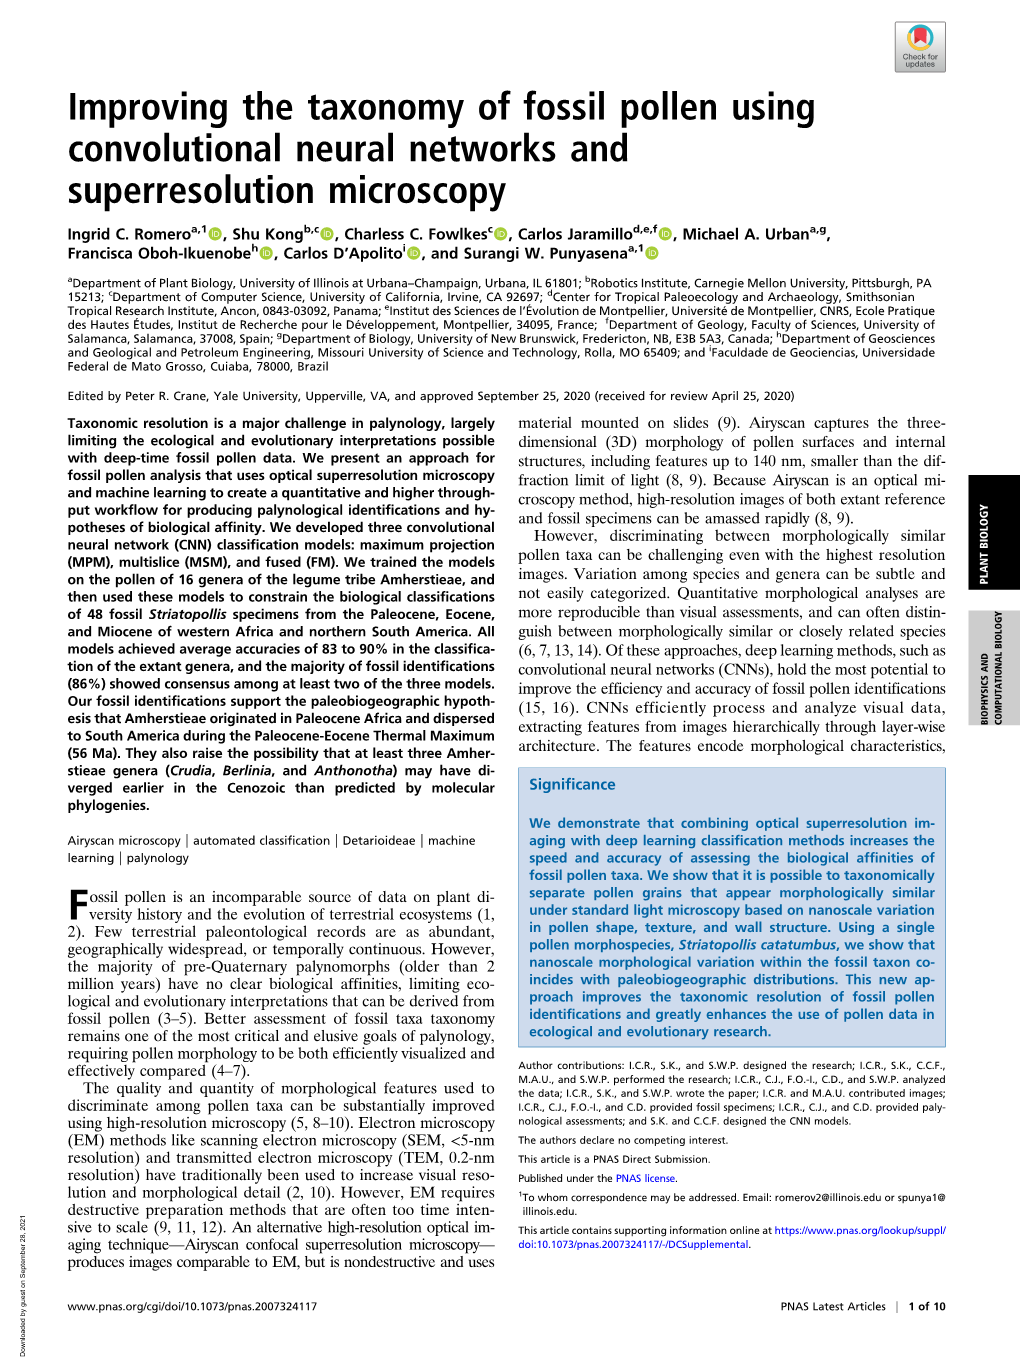 Improving the Taxonomy of Fossil Pollen Using Convolutional Neural Networks and Superresolution Microscopy